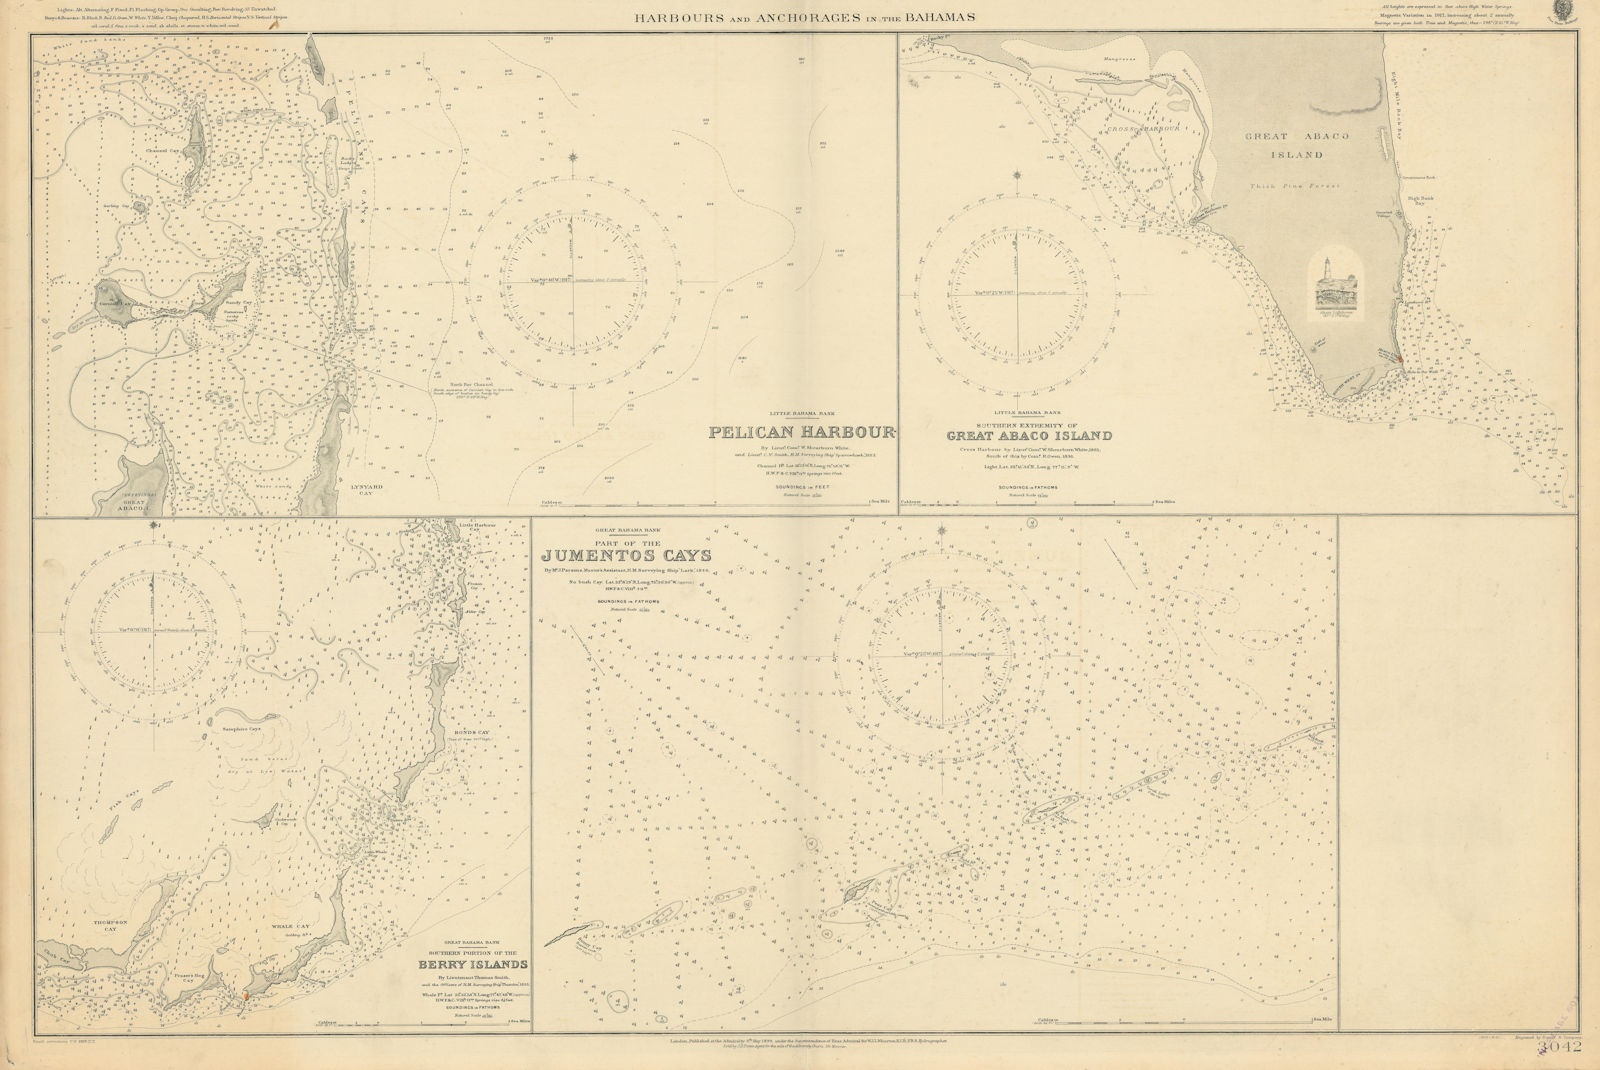 Bahamas harbours Pelican Abaco Berry I Jumentos ADMIRALTY chart 1899 (1920) map